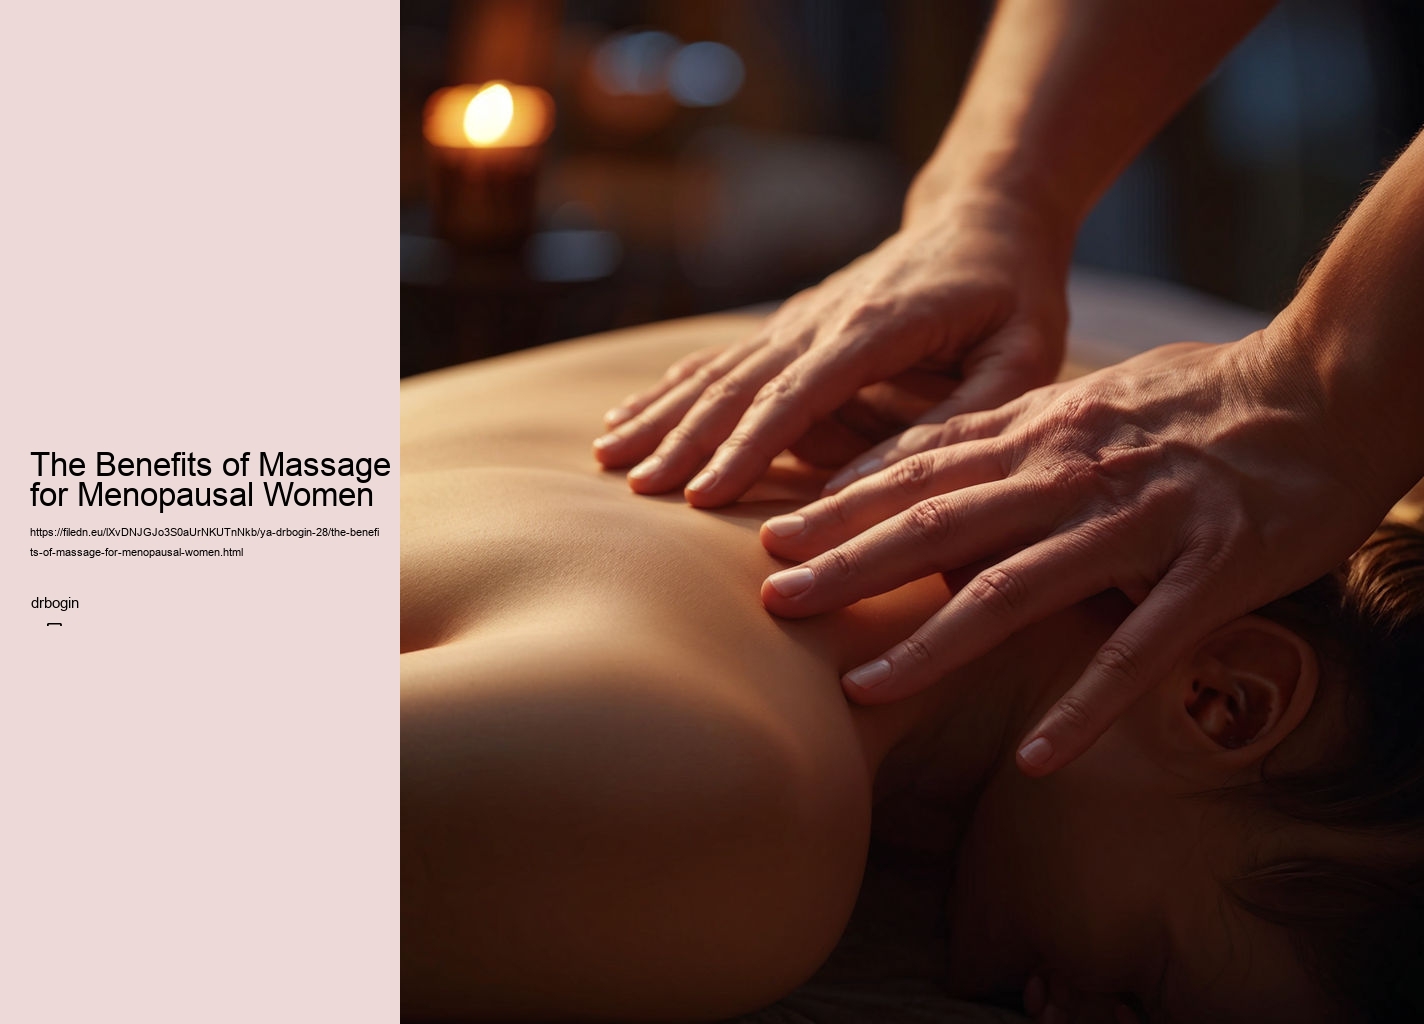 The Benefits of Massage for Menopausal Women